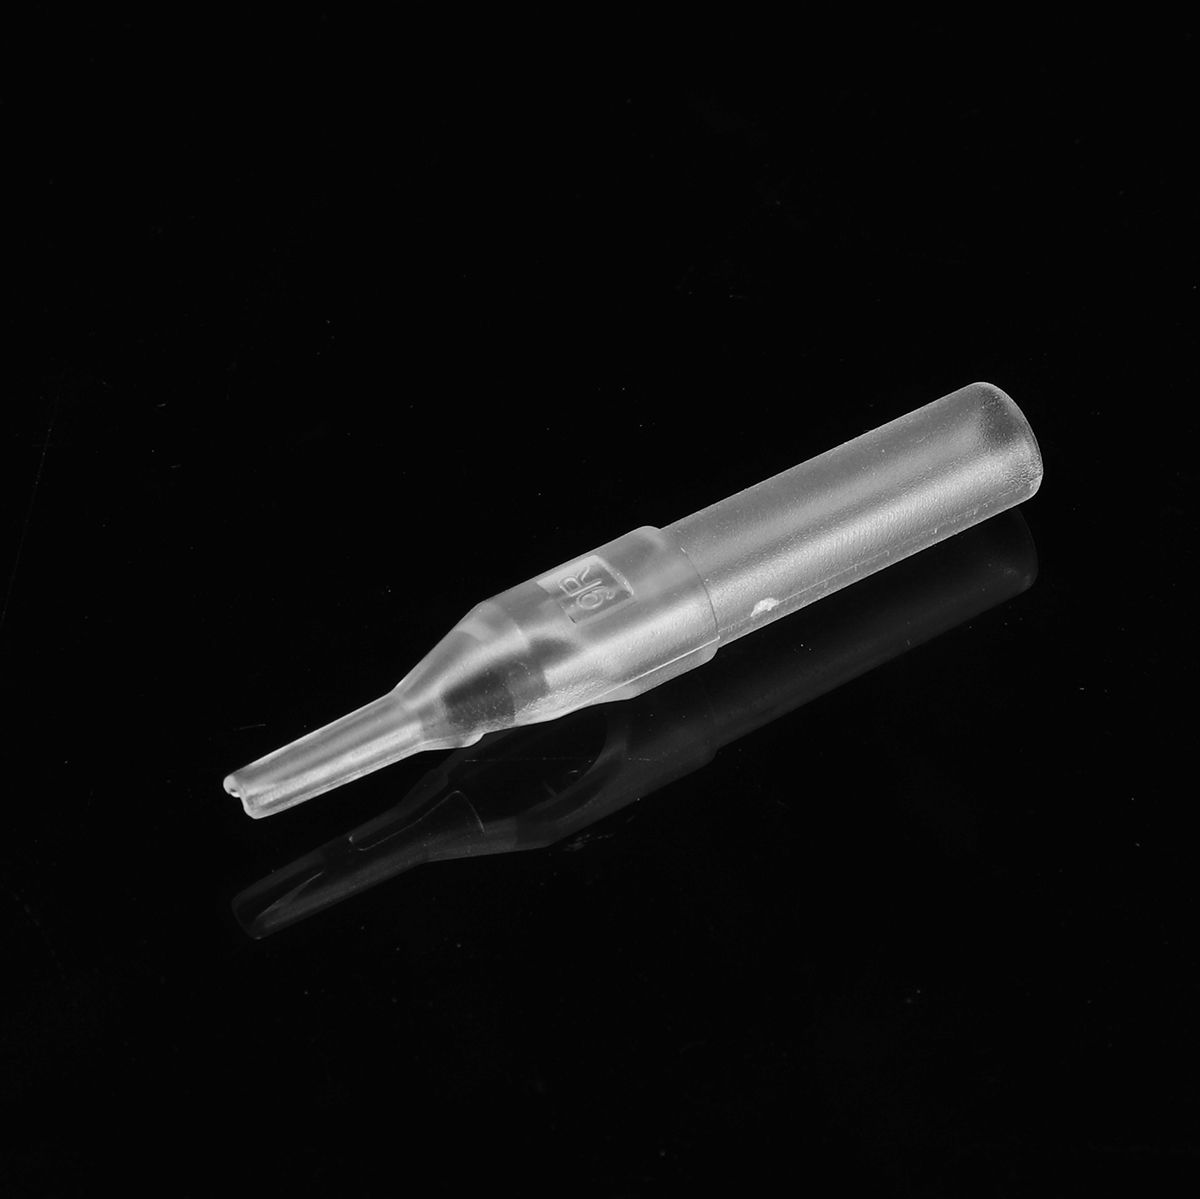 100pcs-10-Size-Round-Clear-Plastic-Tattoo-Grips-Tips-Nozzles-Disposable-Supplies-Tattoo-Accessories-1346523